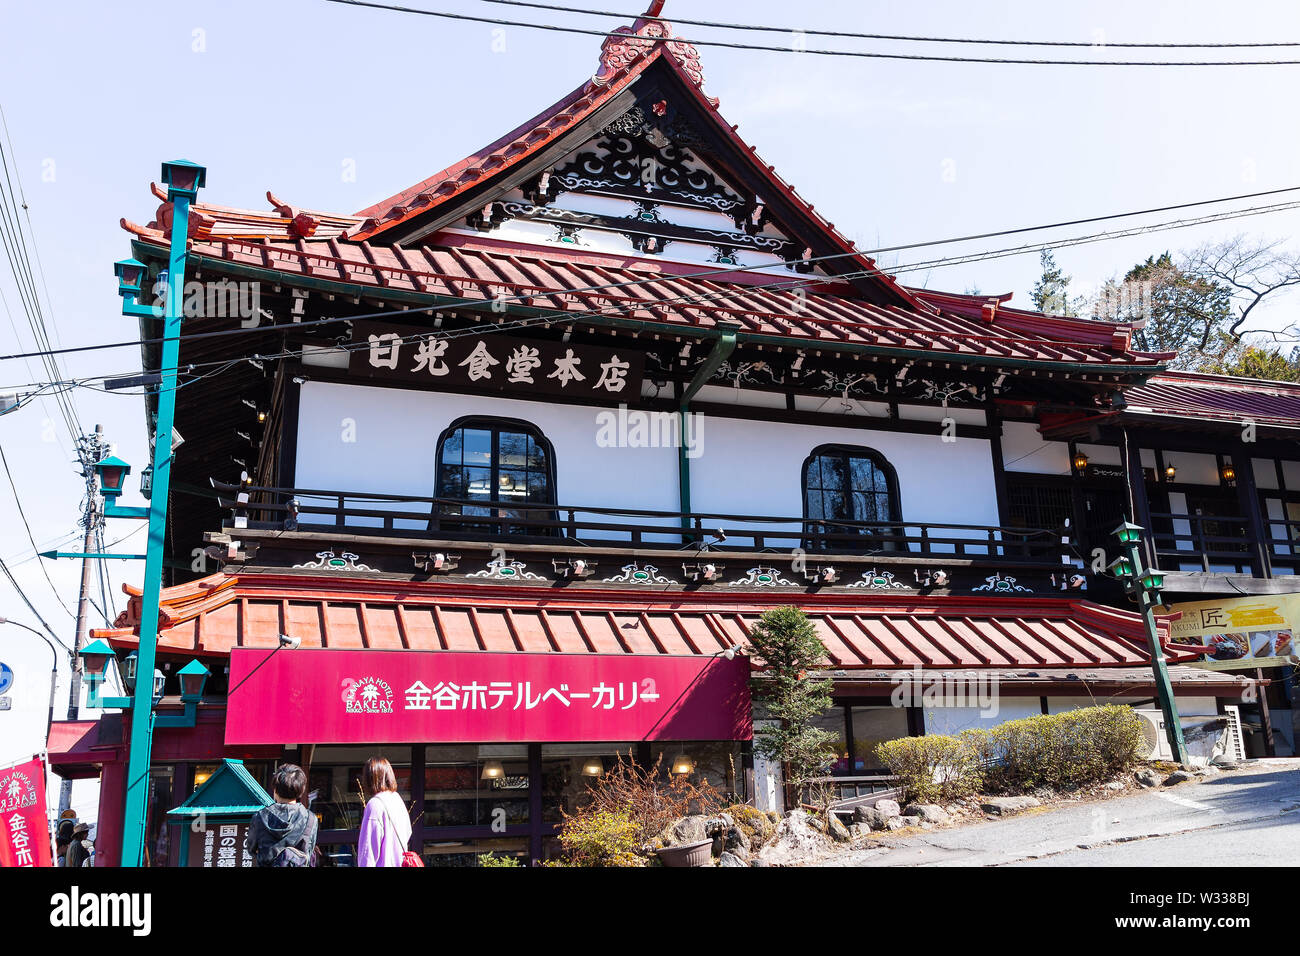 Nikko, Japan - April 4, 2019: Famous Kanaya hotel made in traditional wooden Japanese style design on street with people in Tochigi prefecture Stock Photo